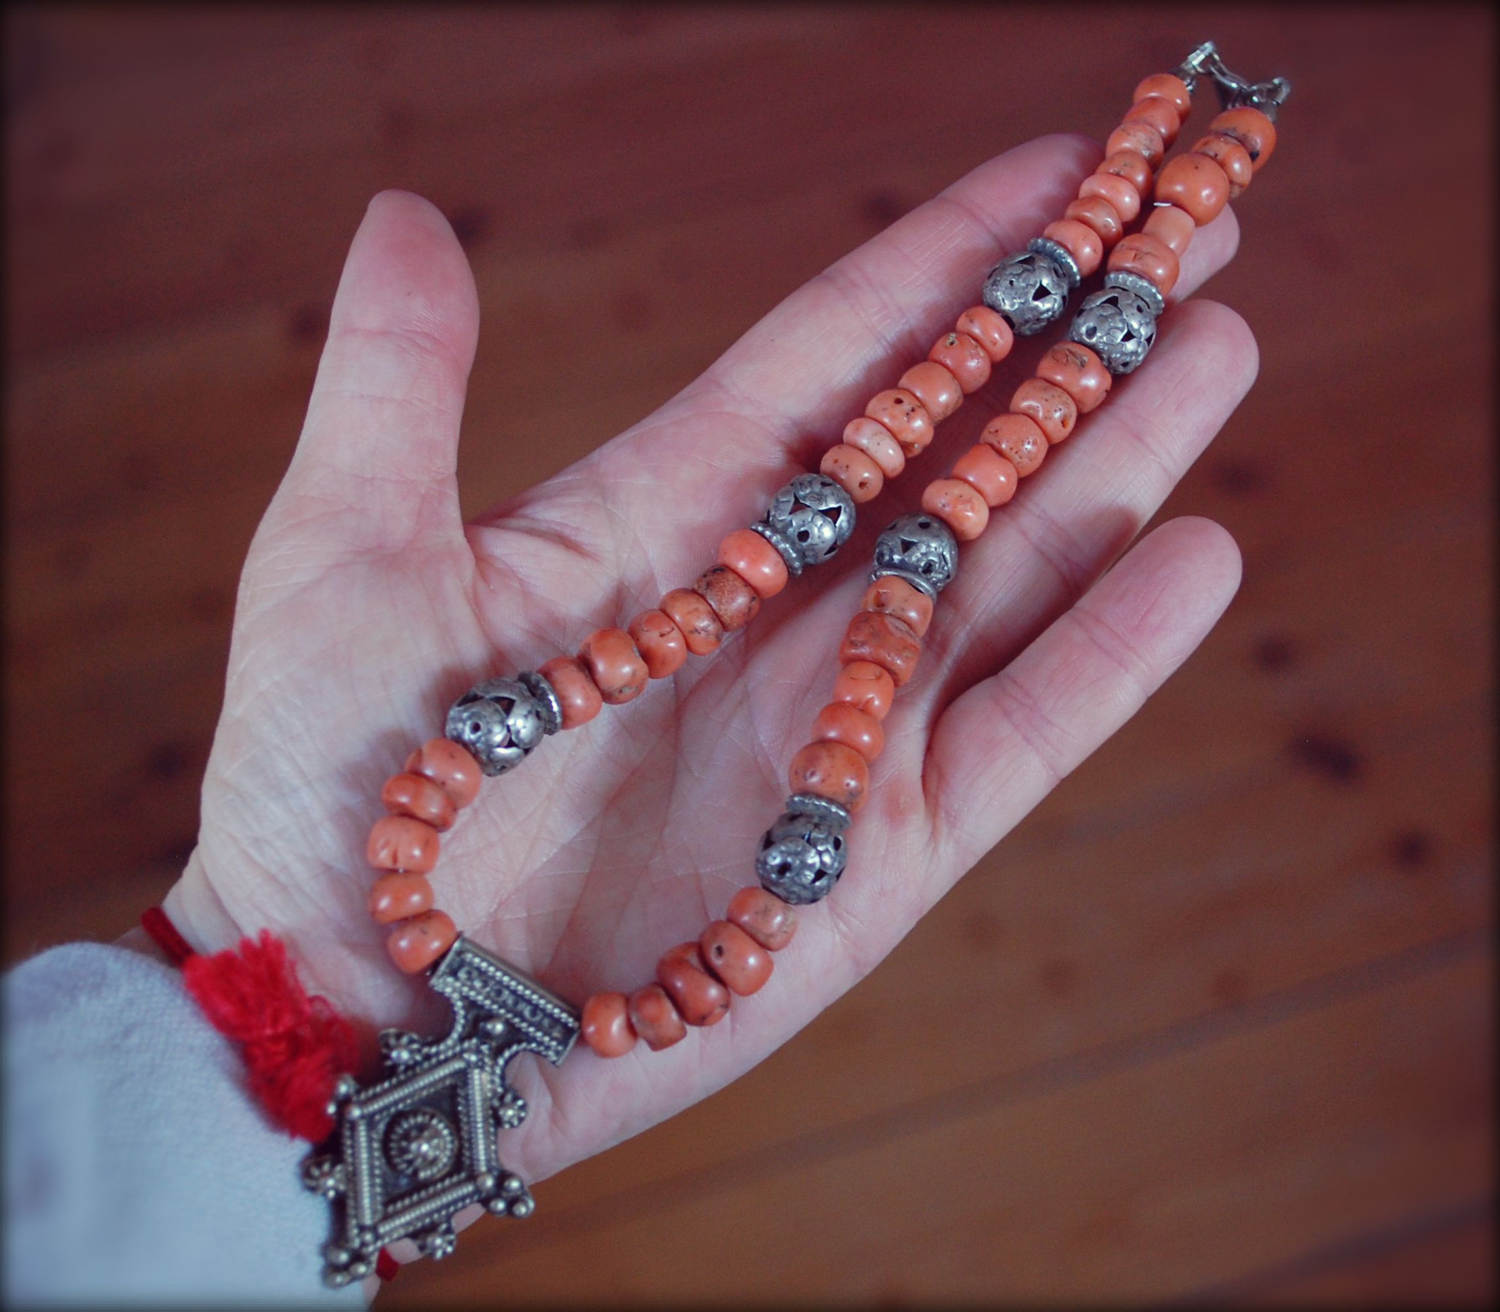 Berber Cross Coral Choker Necklace with Tribal Silver Beads